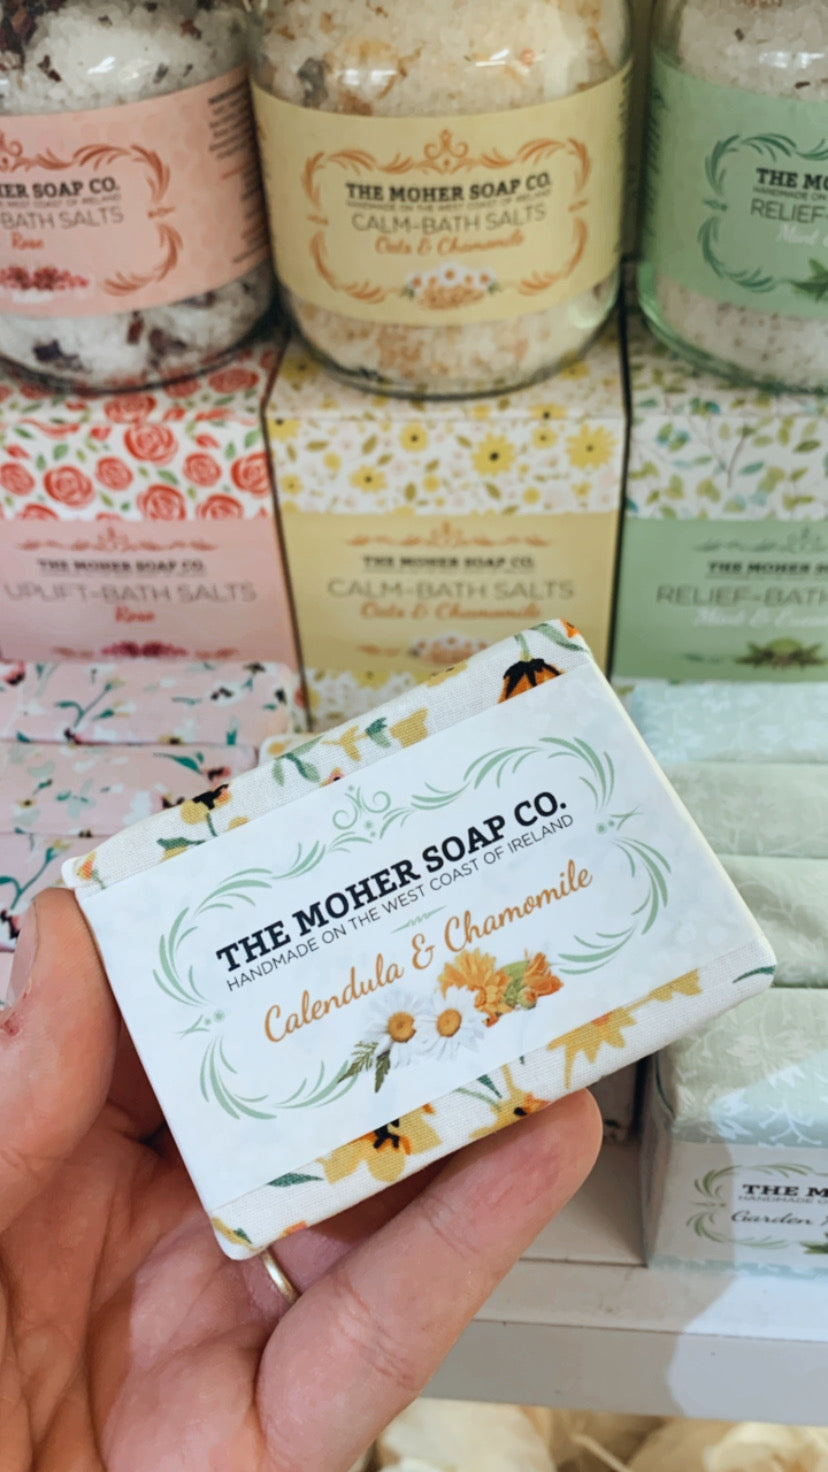 Moher Soap and Scrubs